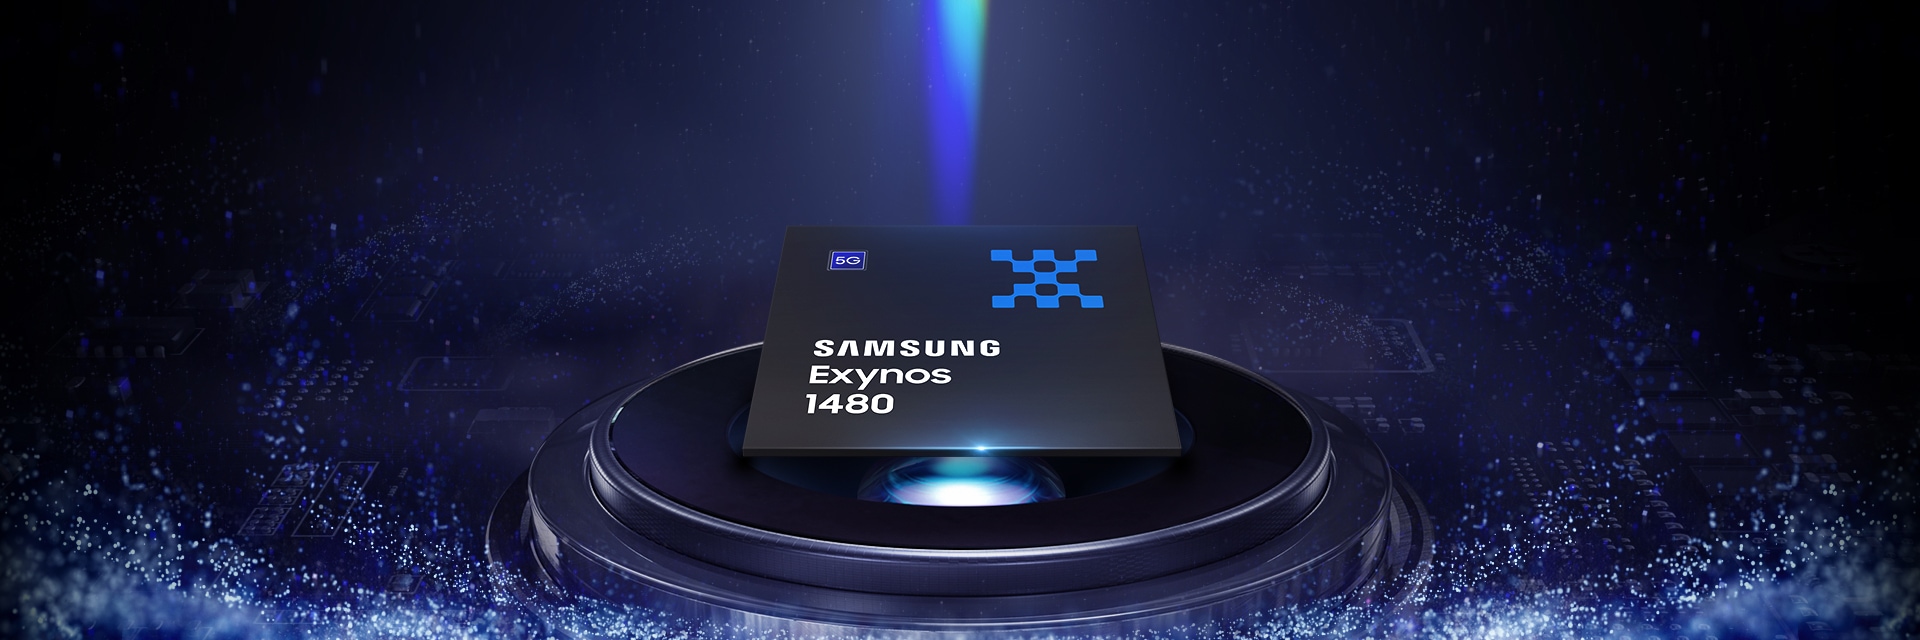 The Samsung Exynos 1480 enhances the mobile experience with advanced AI imaging technology and support for 200MP image sensors.